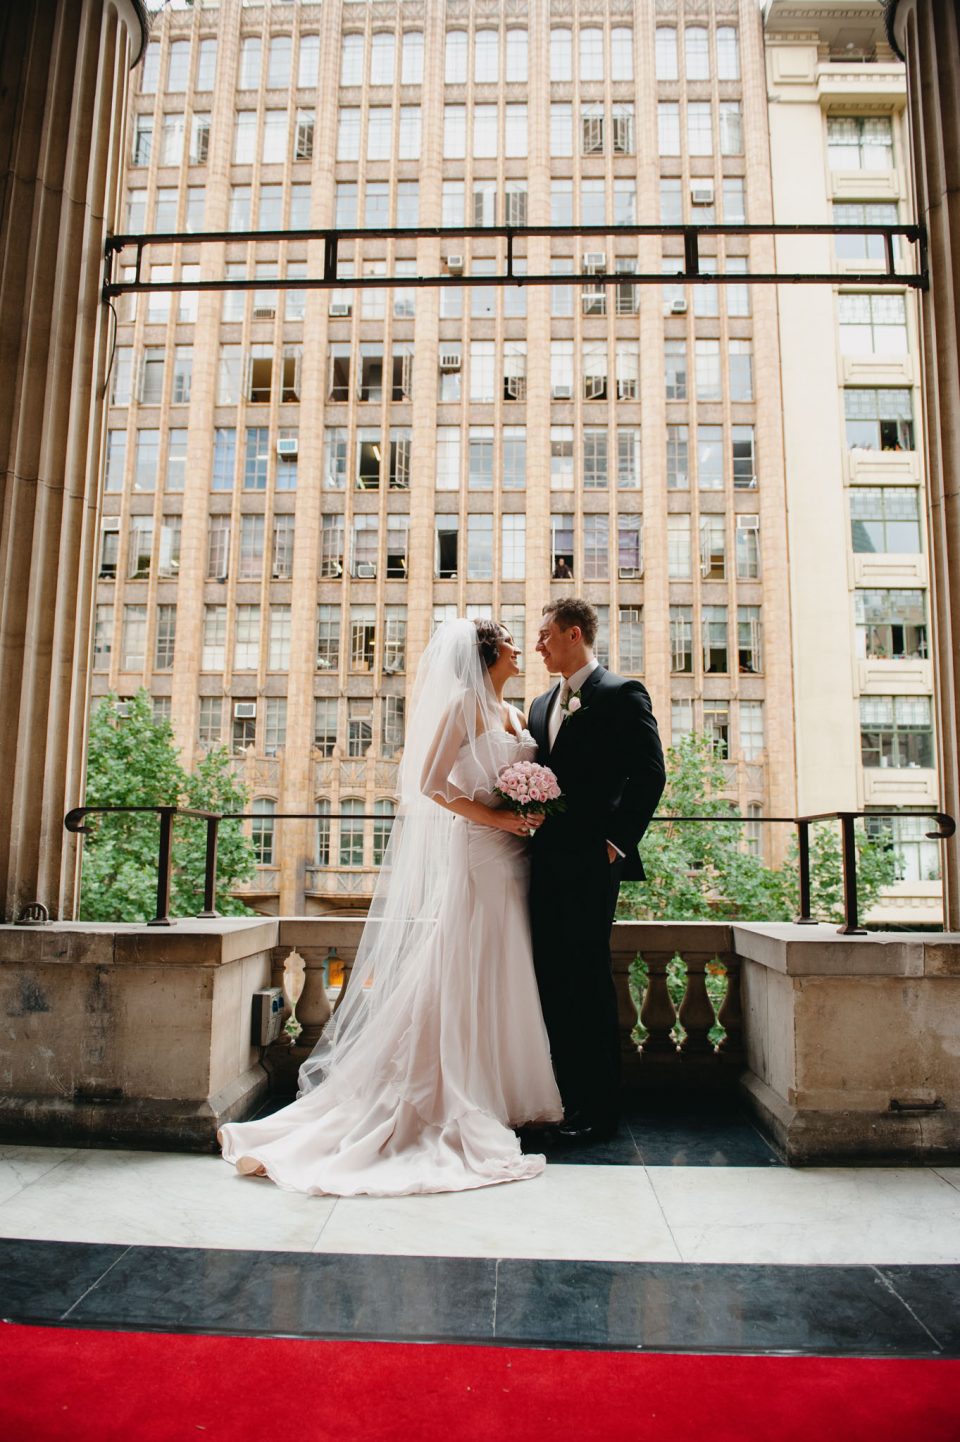 Wedding ceremony at Melbourne Town Hall